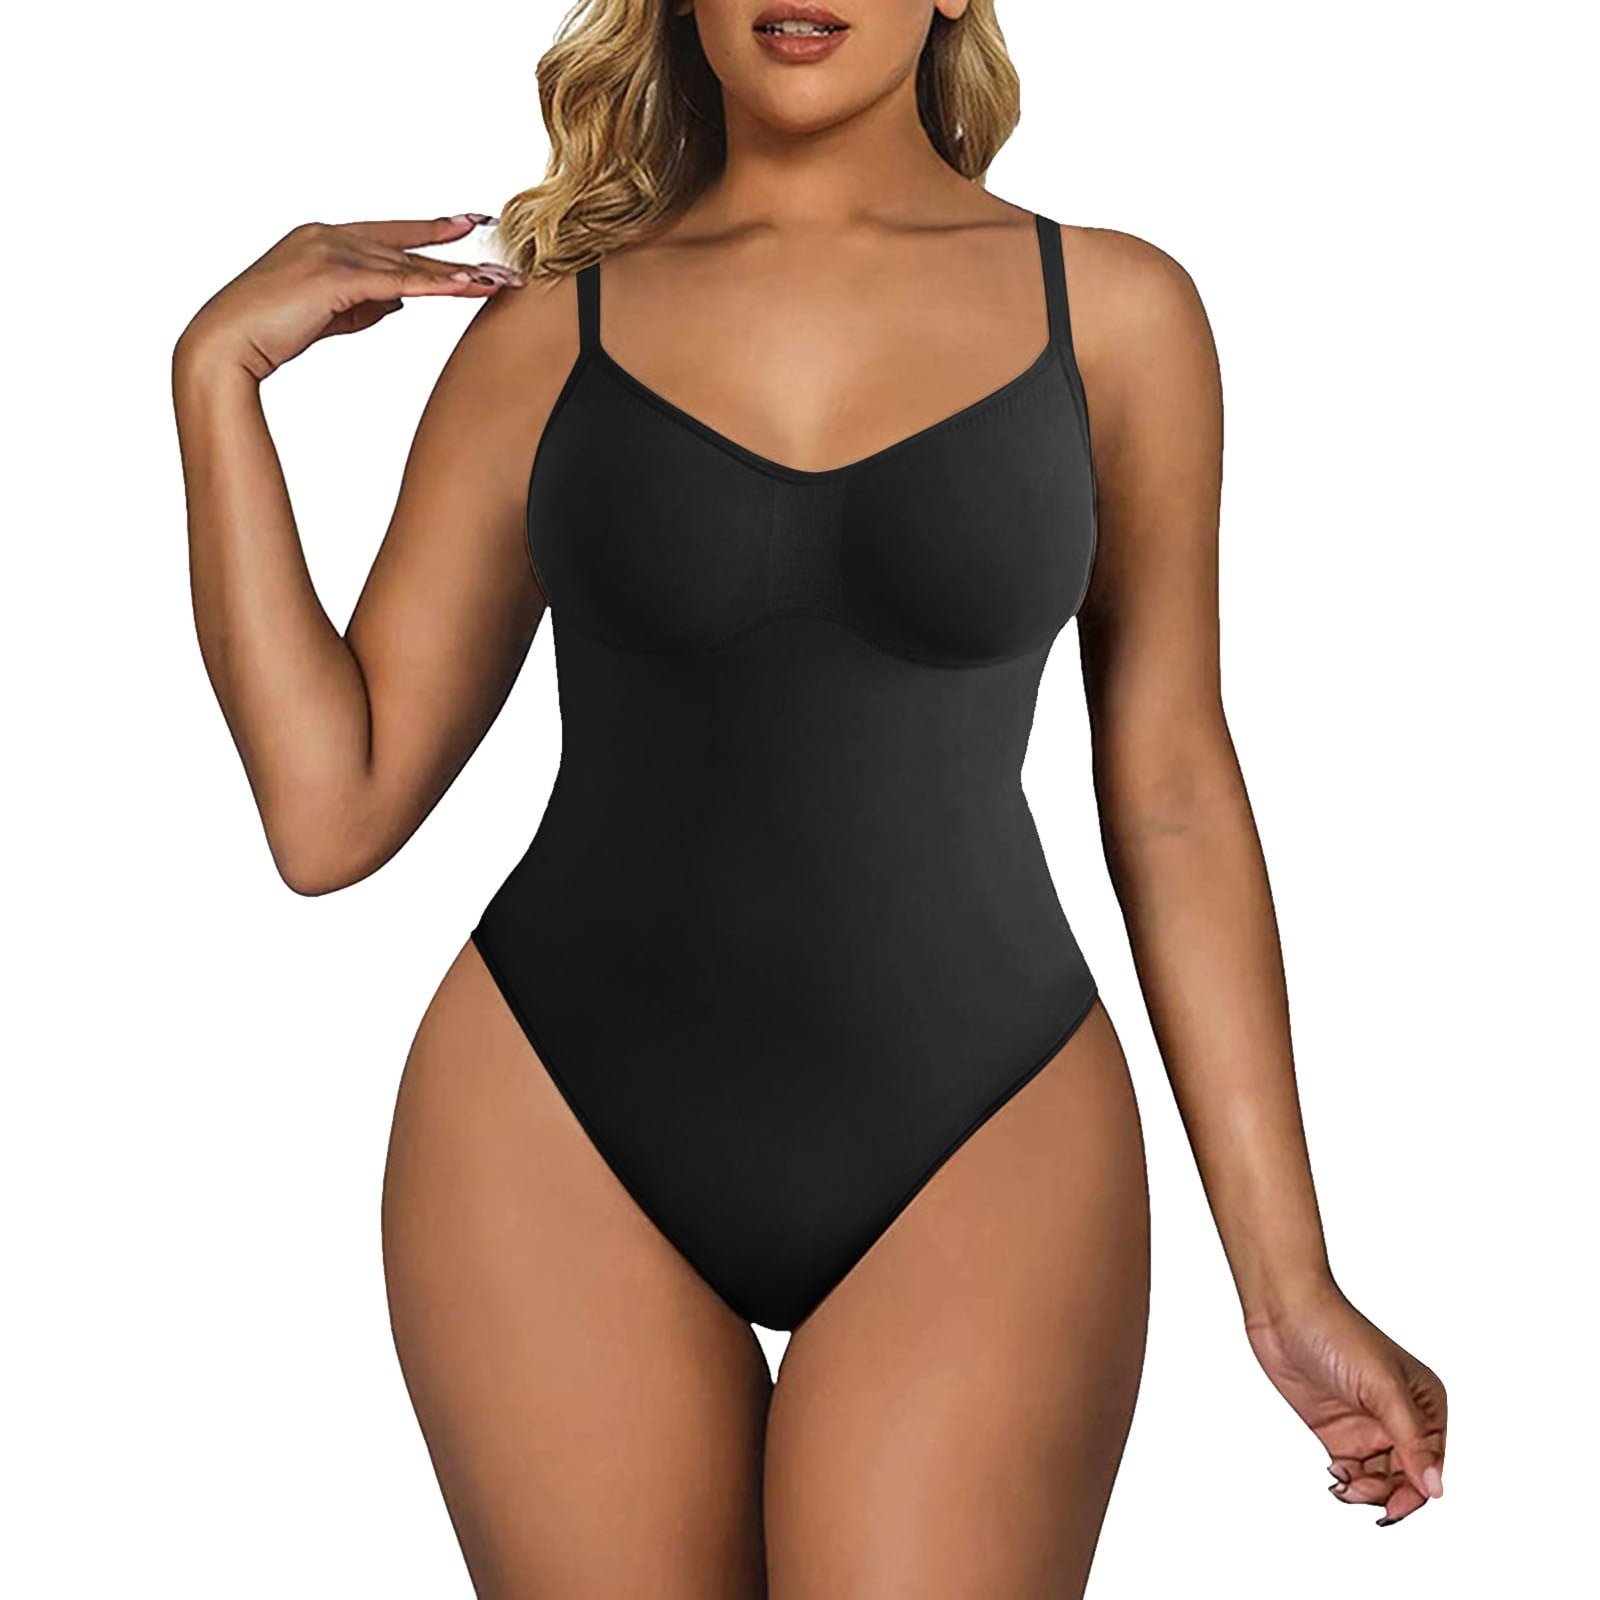 Seamless Body Shaper With Tummy Control, Belly Control And Elastic  Waistband For Womens Hunkemöller Shapewear And Sculpting From Tangculiyu,  $18.31